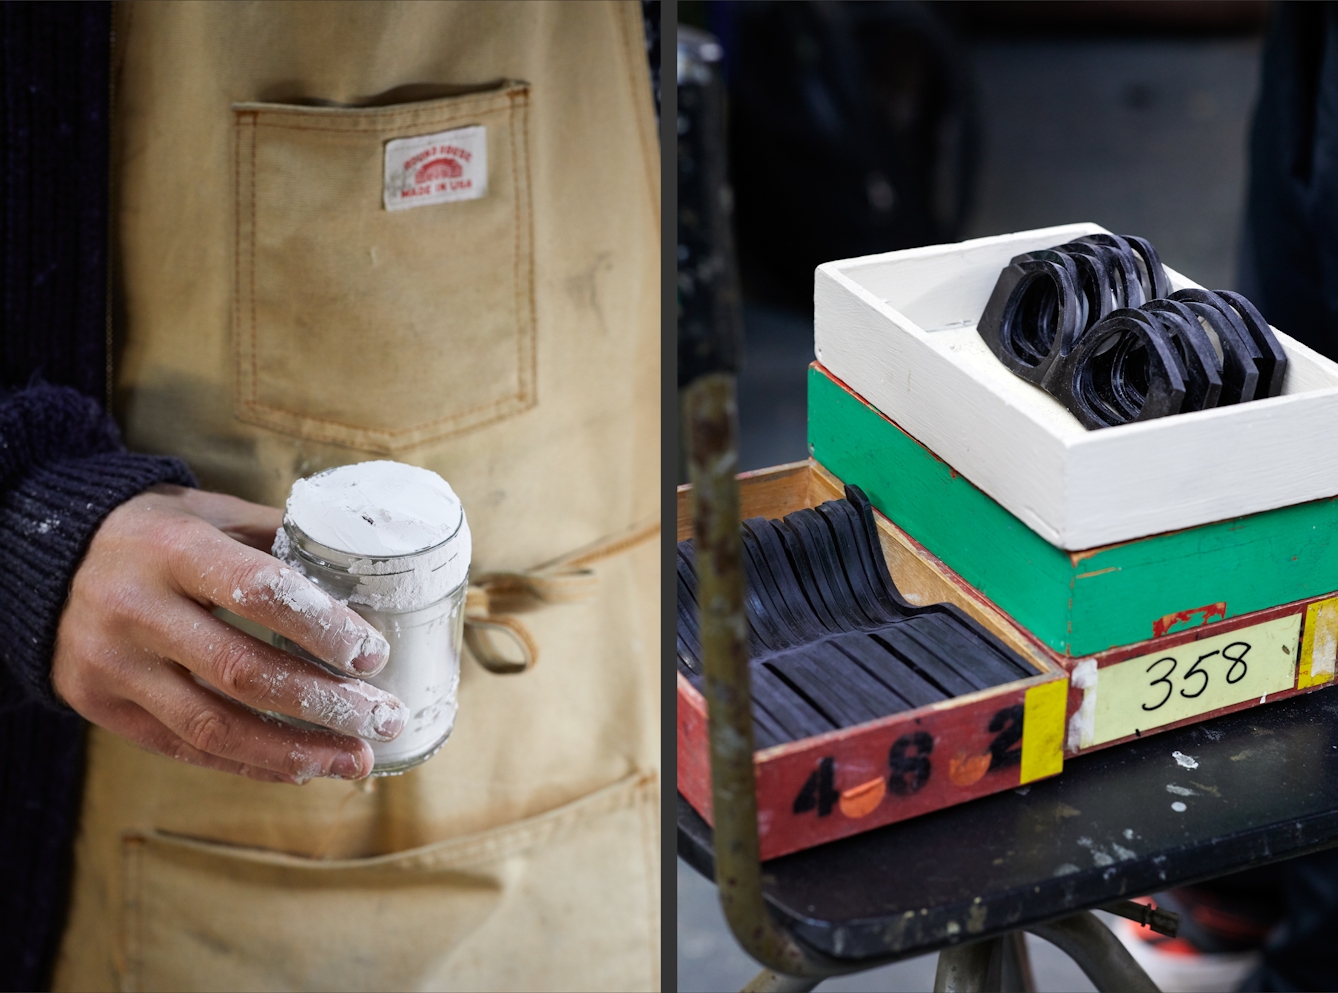 Photographic diptych. The image on the left shows a close up view of a man wearing a brown apron holding a glass jar full of white powder. Some of the power is caked over his fingers. The image on the right show a close up view several boxes stacked on a work stool. The boxes contain unfinished spectacle frames.